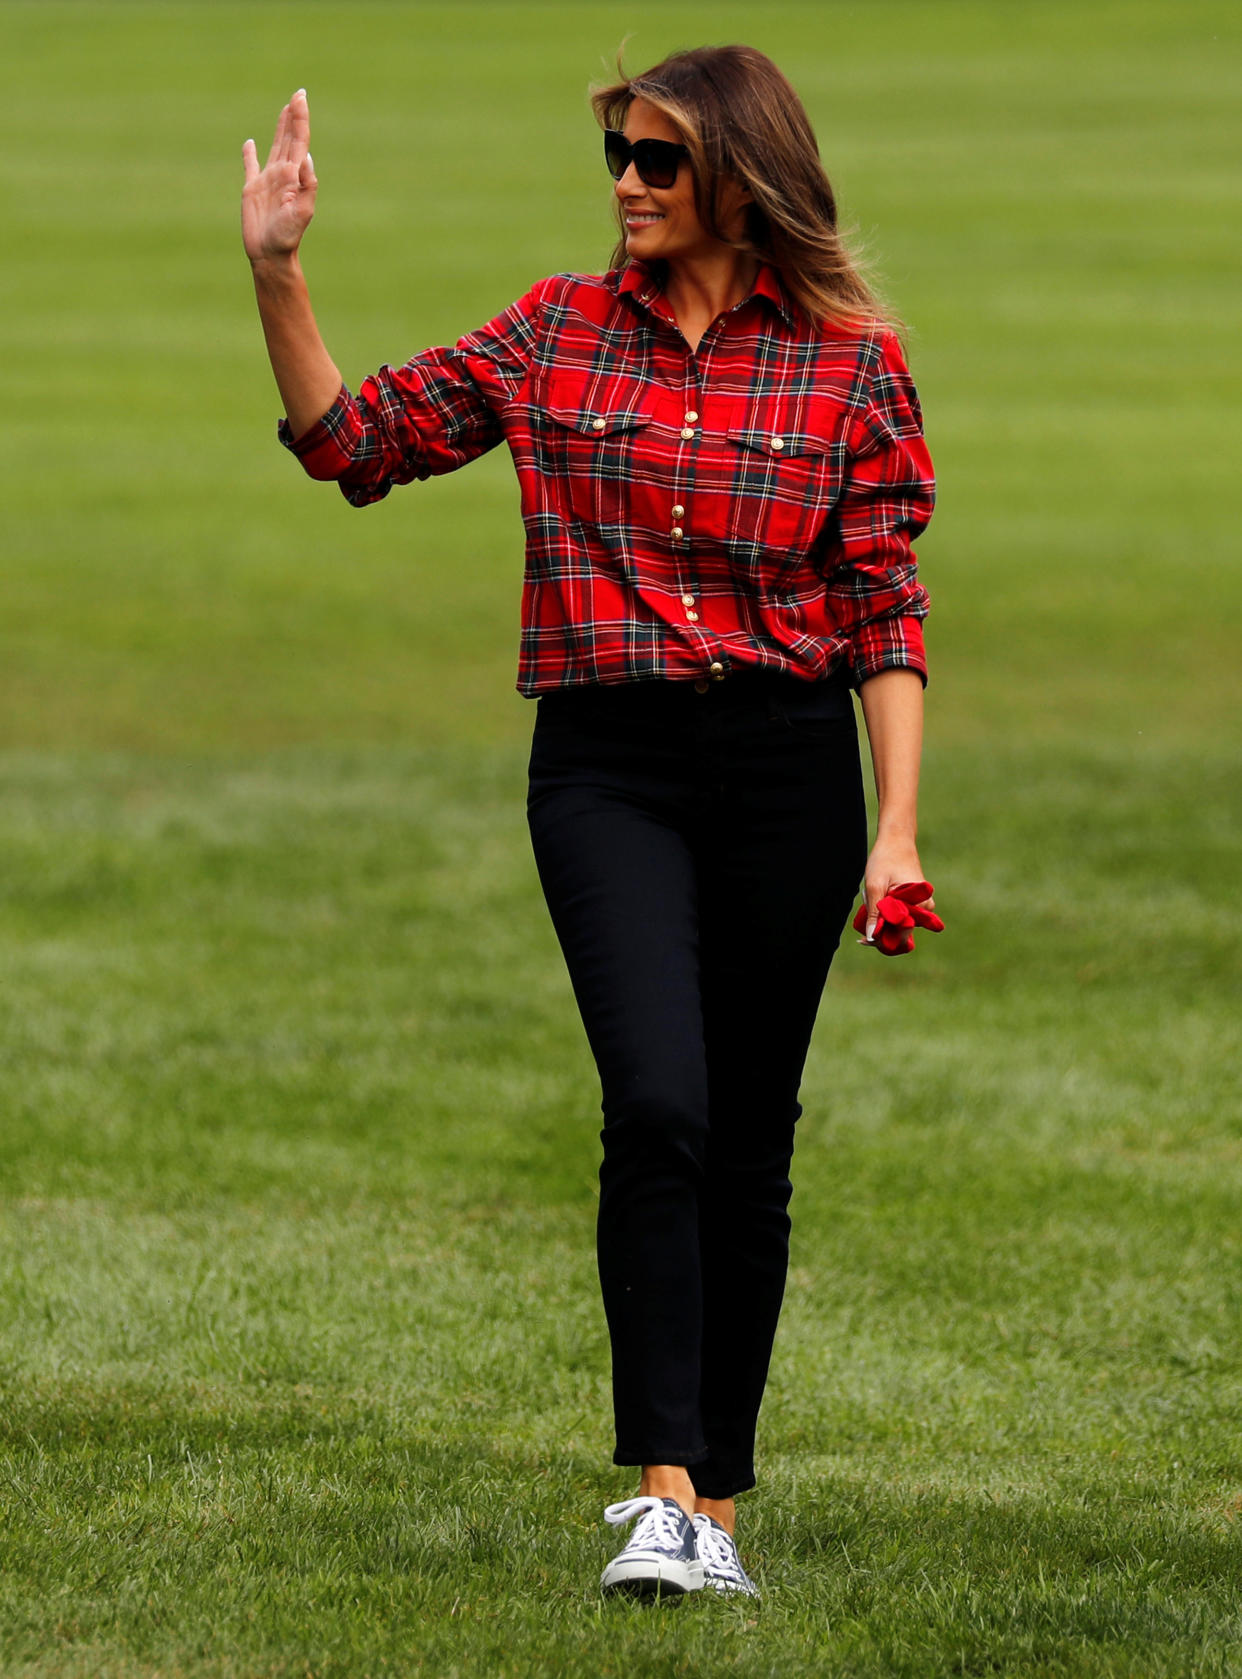 First lady Melania Trump waves as she arrives to work in the White House kitchen garden with children from the Boys and Girls Clubs of Greater Washington, at the White House in Washington on Sept. 22, 2017. (Photo: Reuters/Jonathan Ernst)